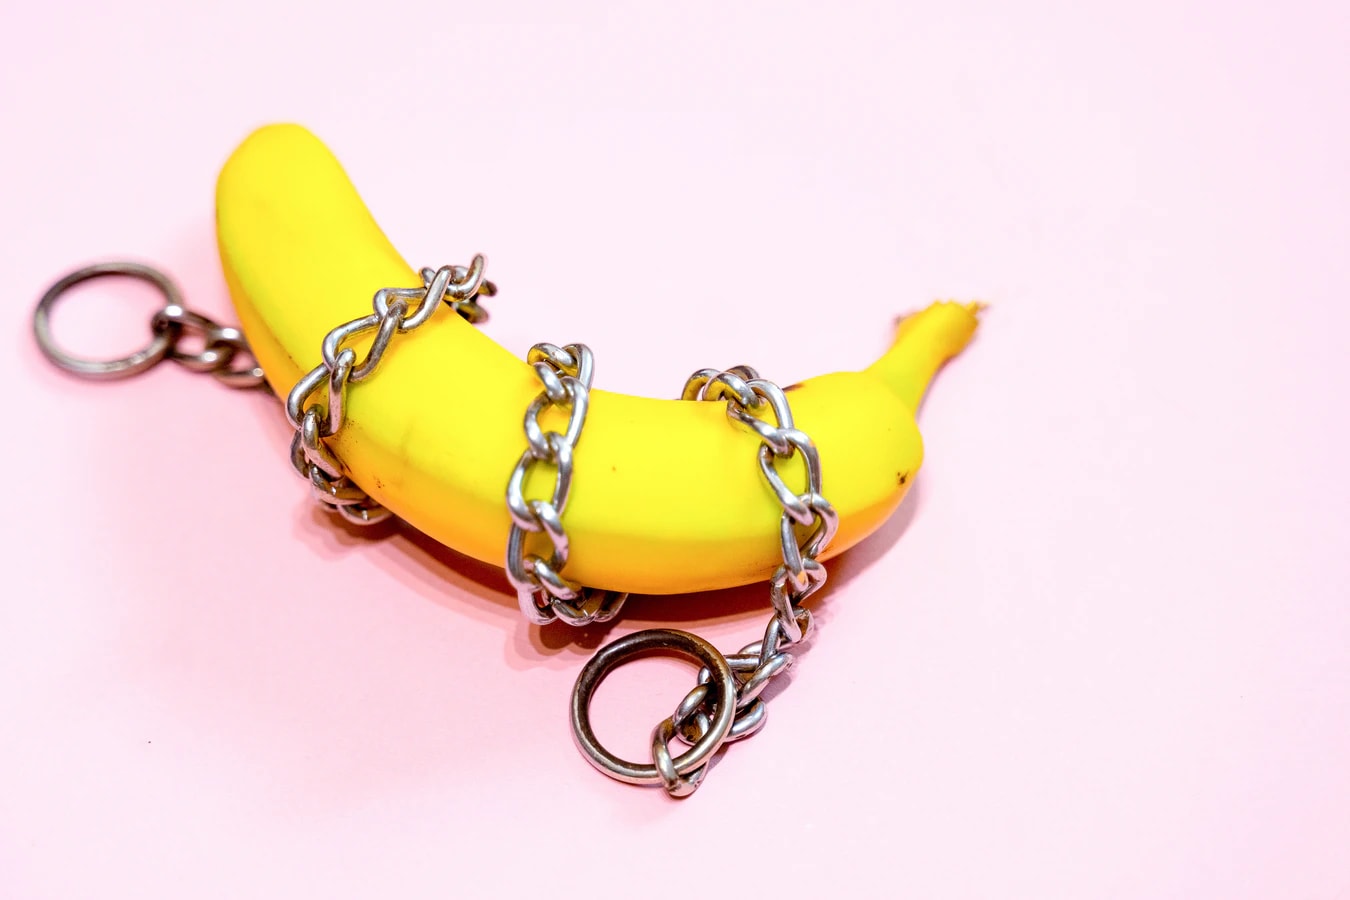 tokyo olympics safety rules - banana chained